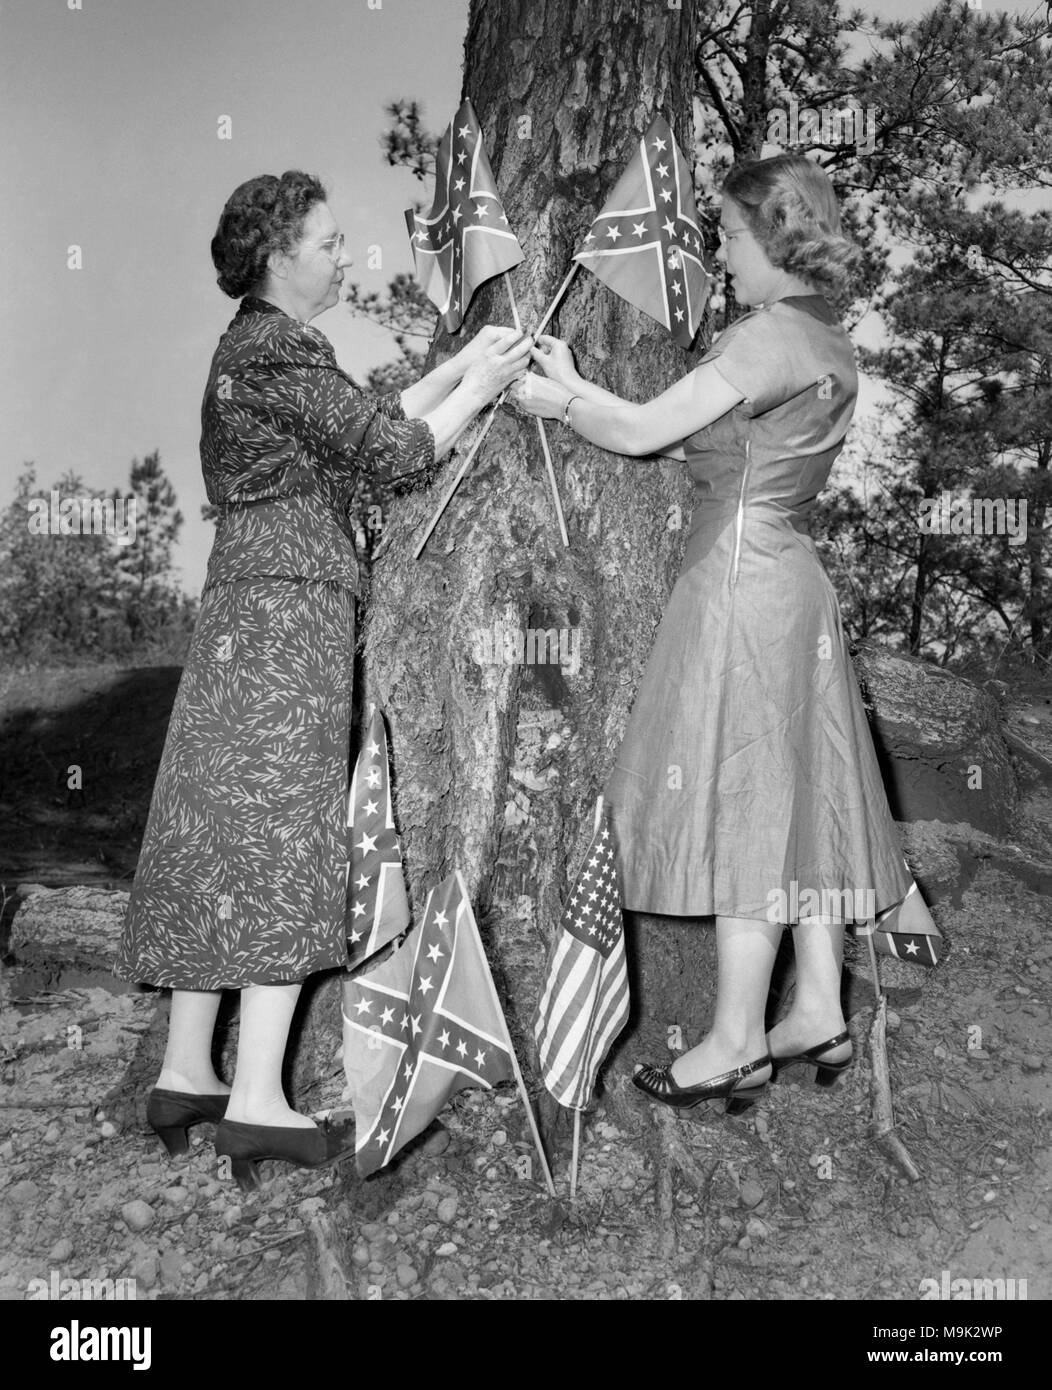 Two women decorate a tree with Confederate flags for a Confederate Memorial Day service in Georgia, ca. 1952. Stock Photo